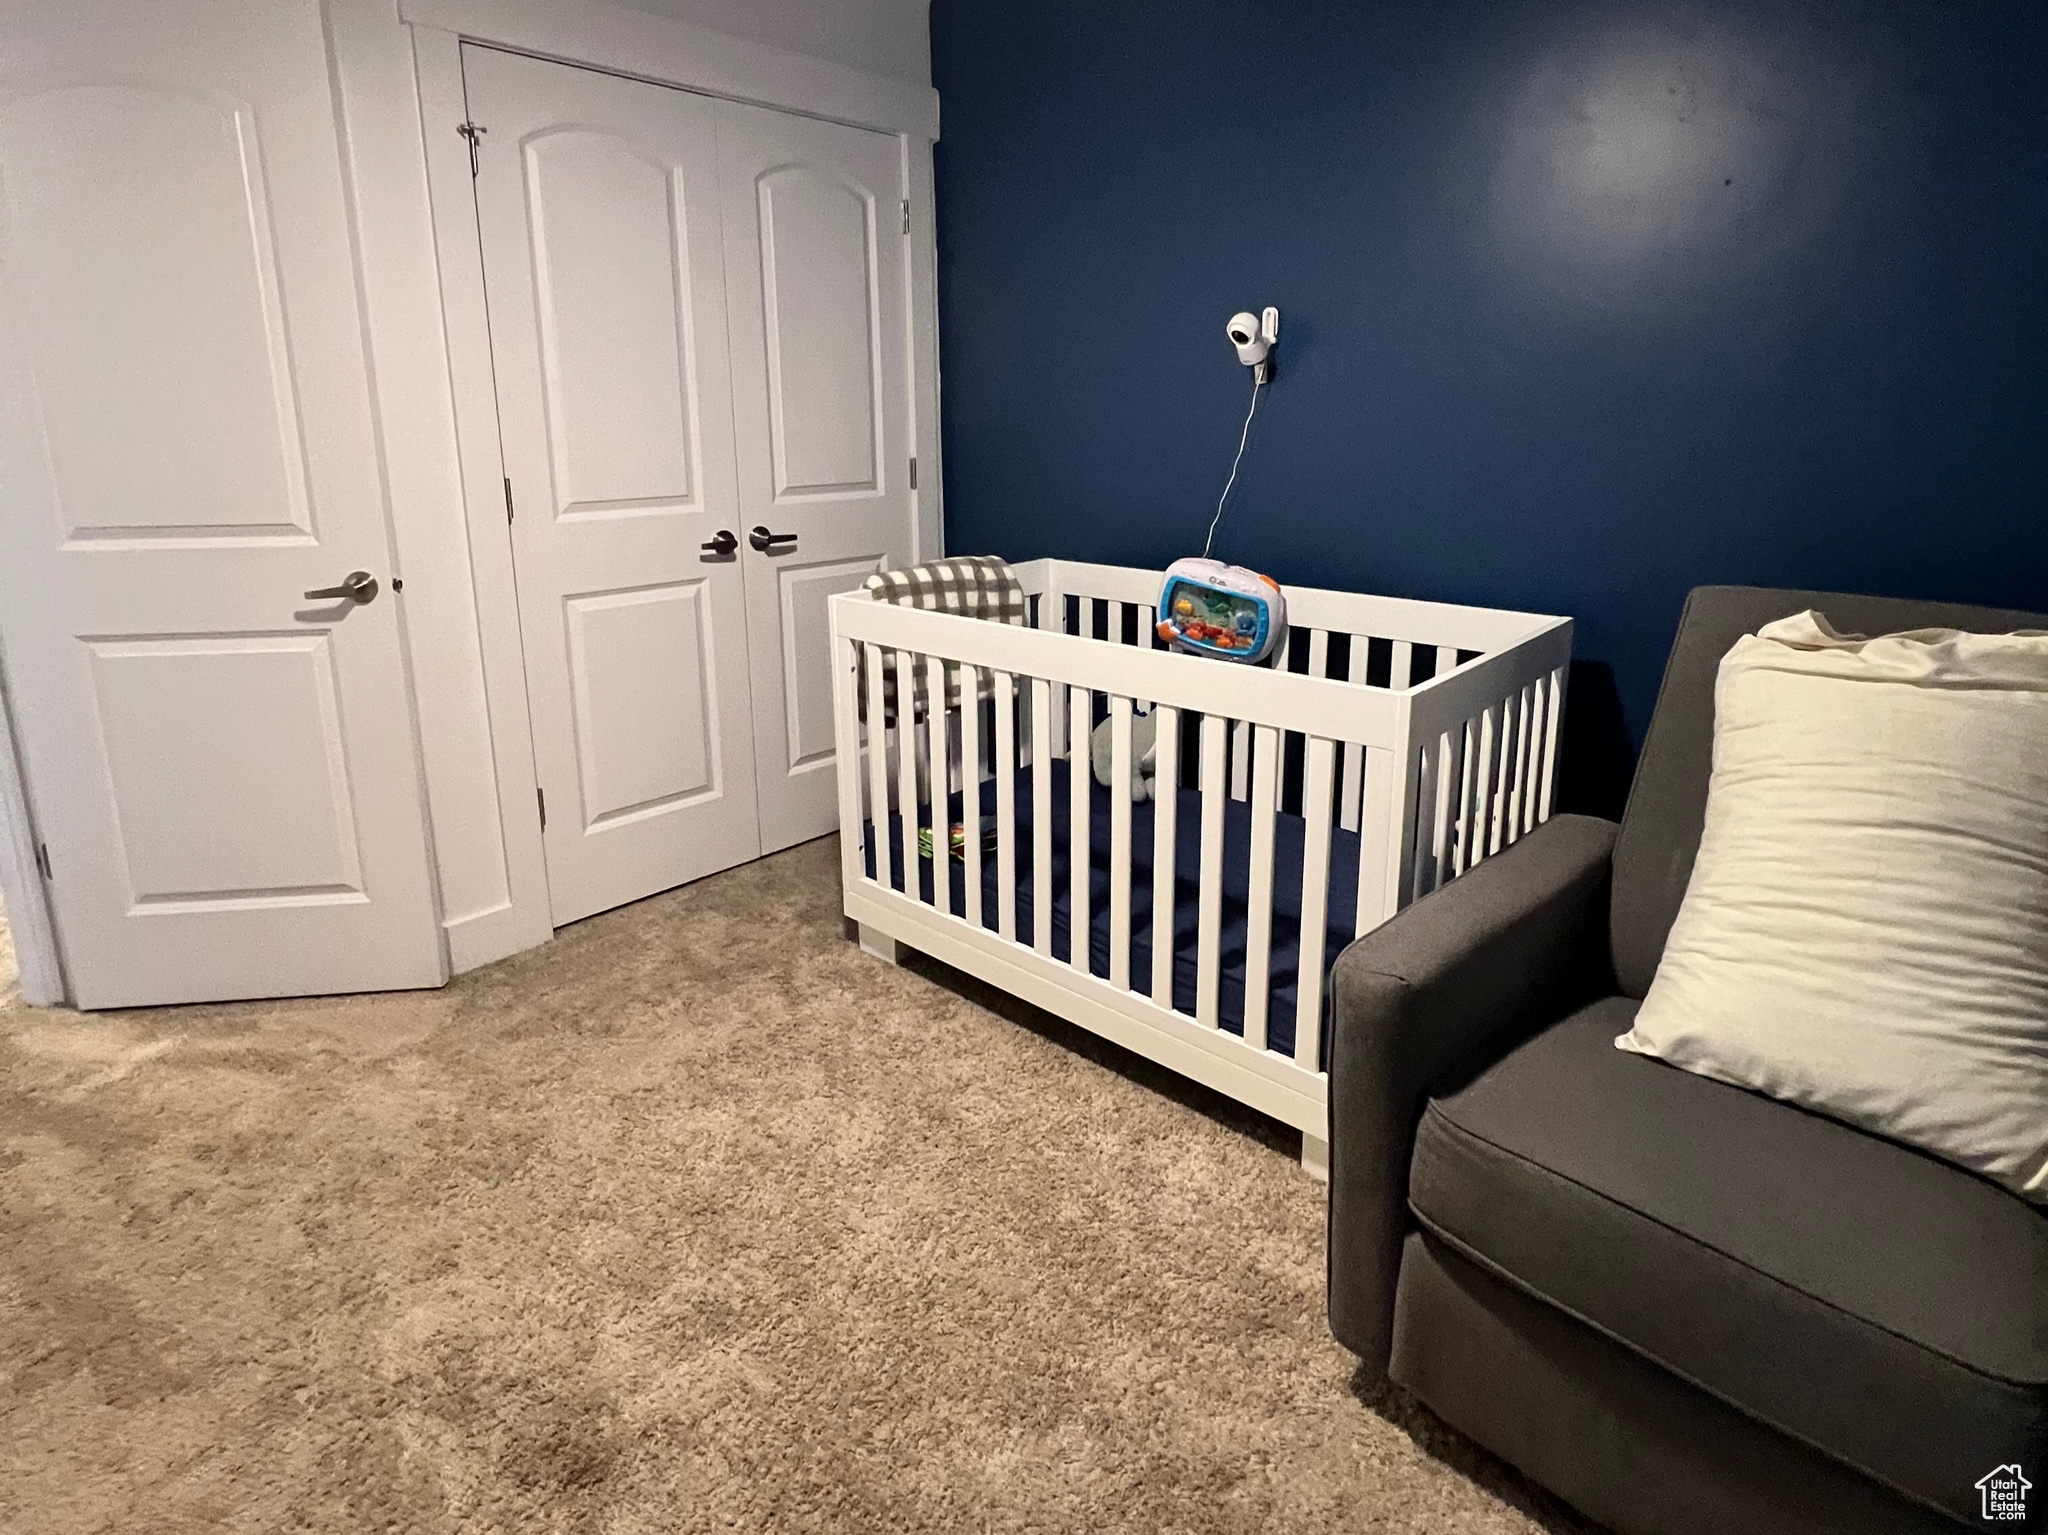 Carpeted bedroom with a closet, ceiling fan, and a nursery area